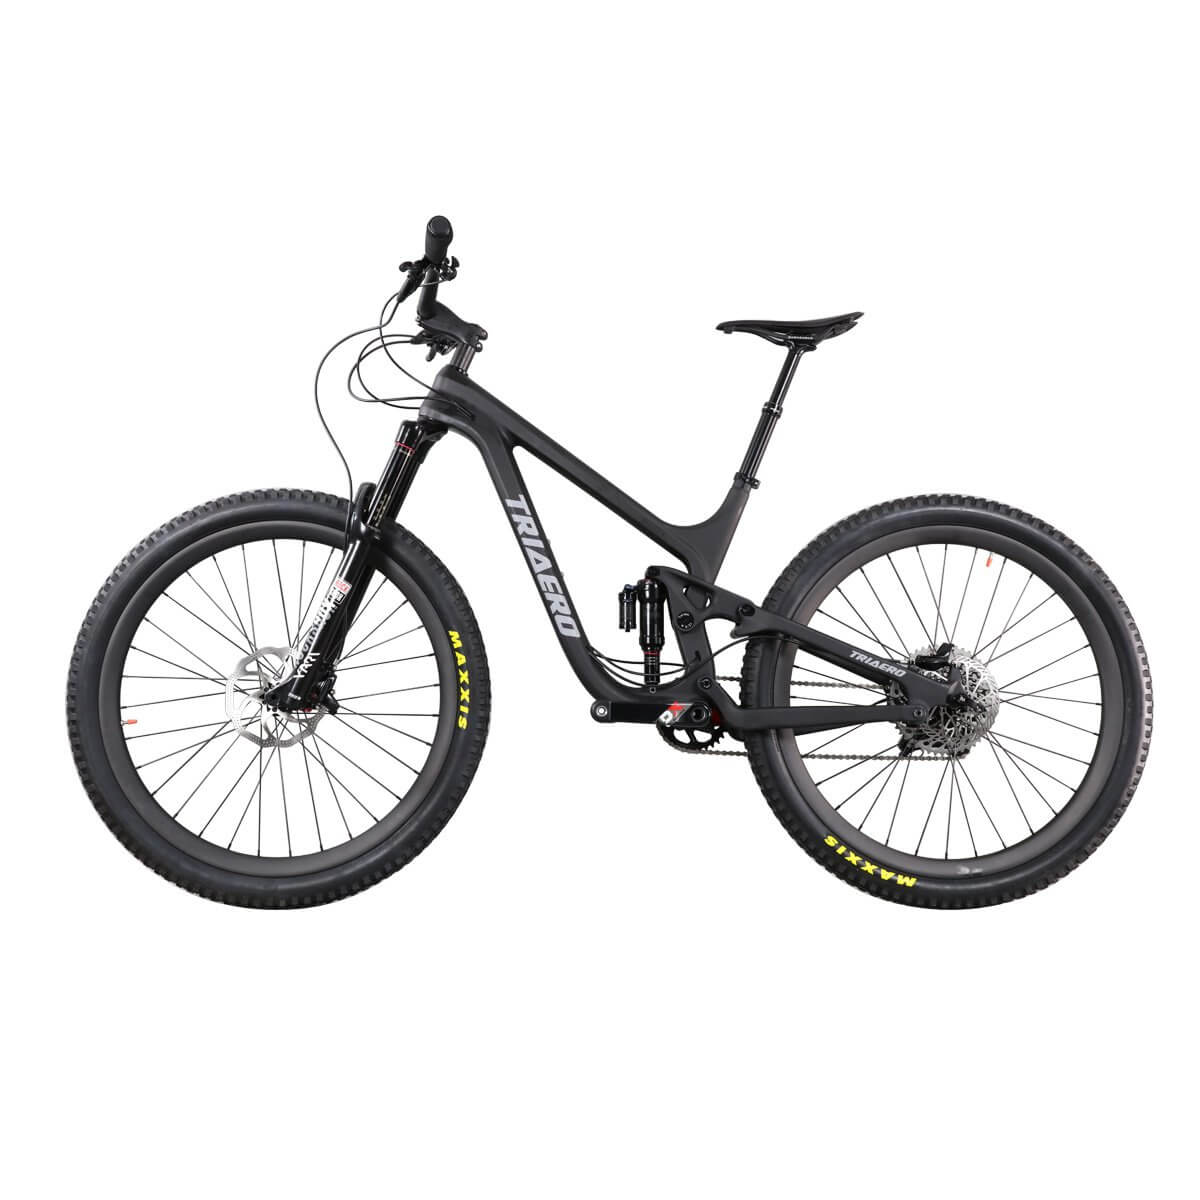 The best 29er 150mm Travel Carbon full suspension Enduro Bike – ICAN Cycling